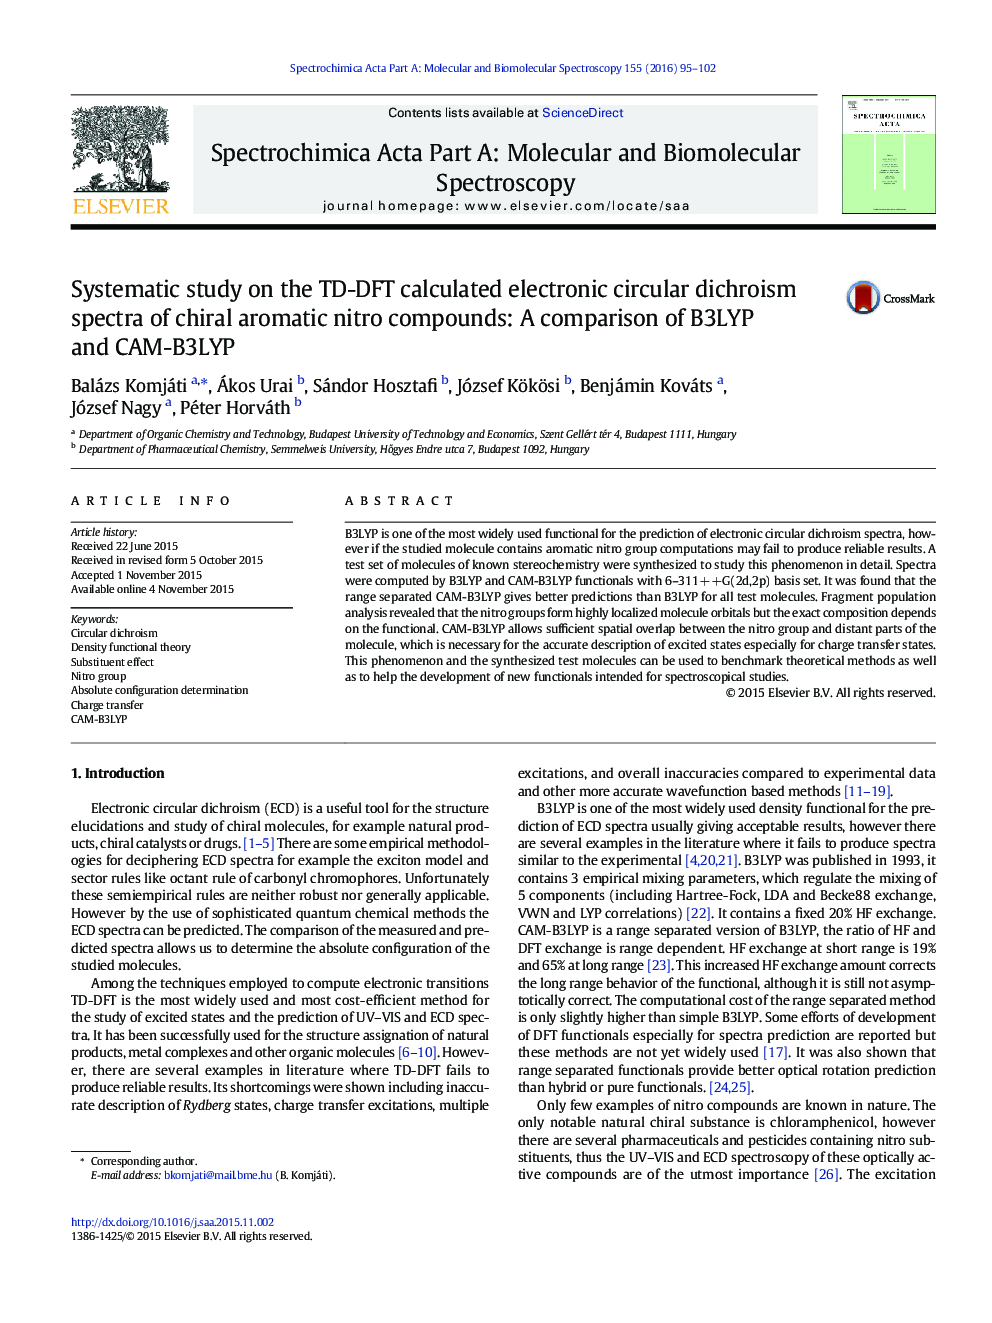 Systematic study on the TD-DFT calculated electronic circular dichroism spectra of chiral aromatic nitro compounds: A comparison of B3LYP and CAM-B3LYP